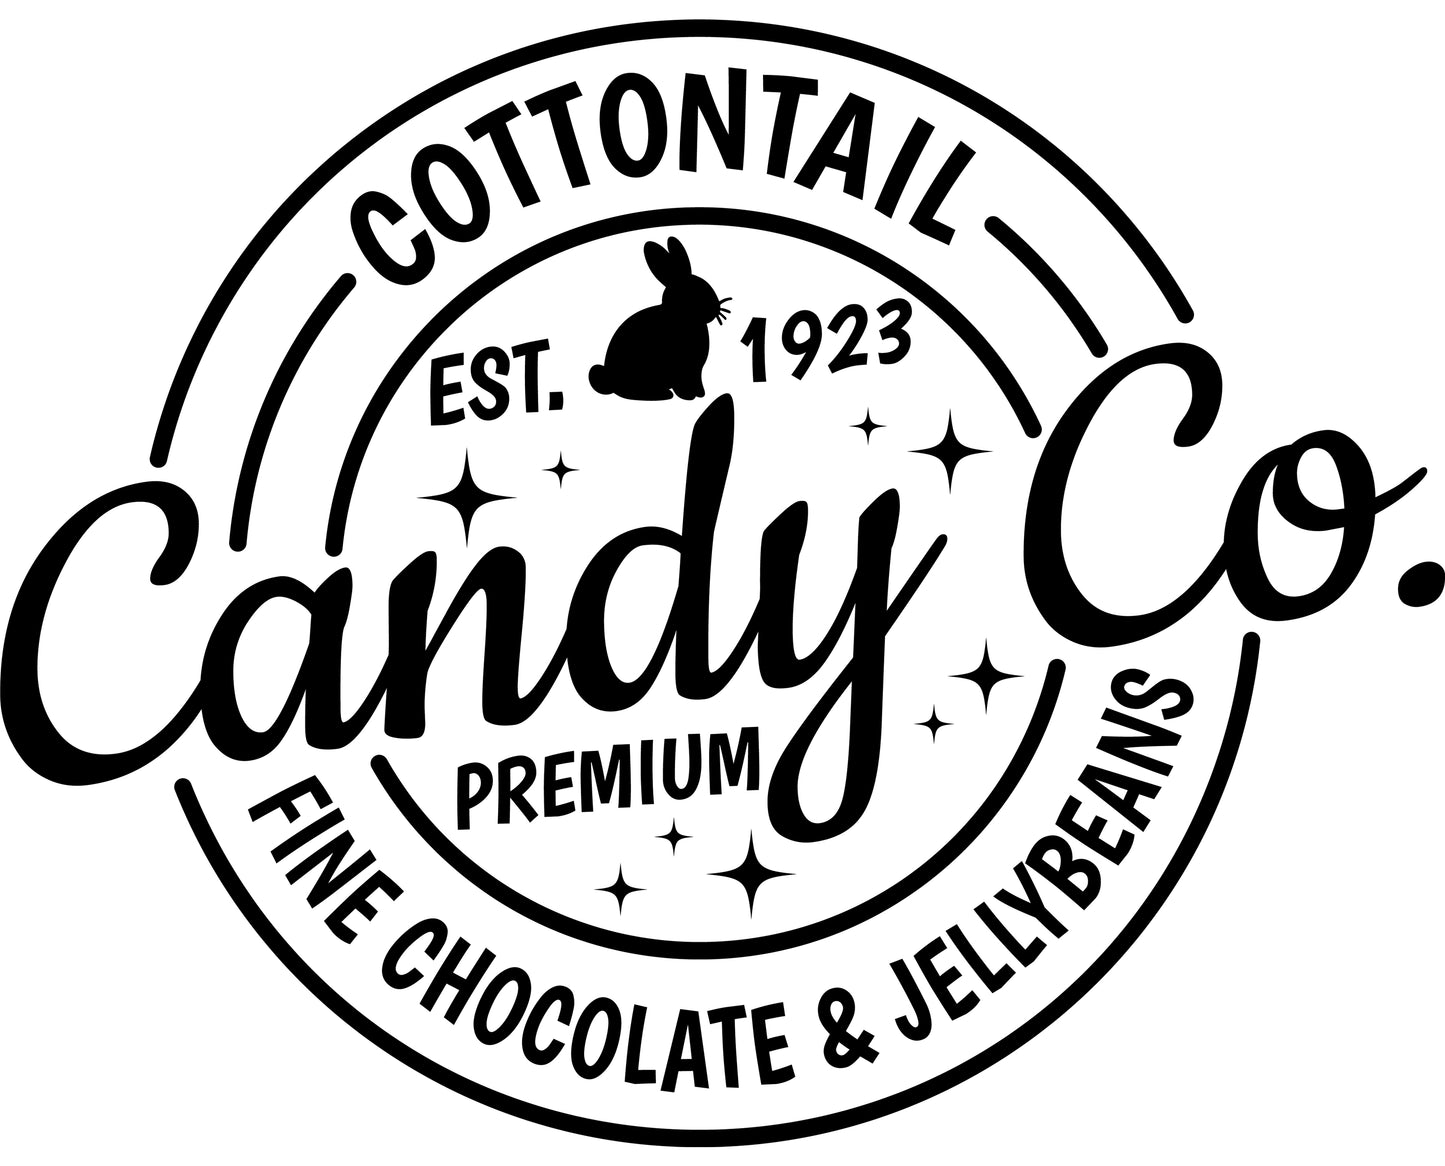 Cottontail Candy Co